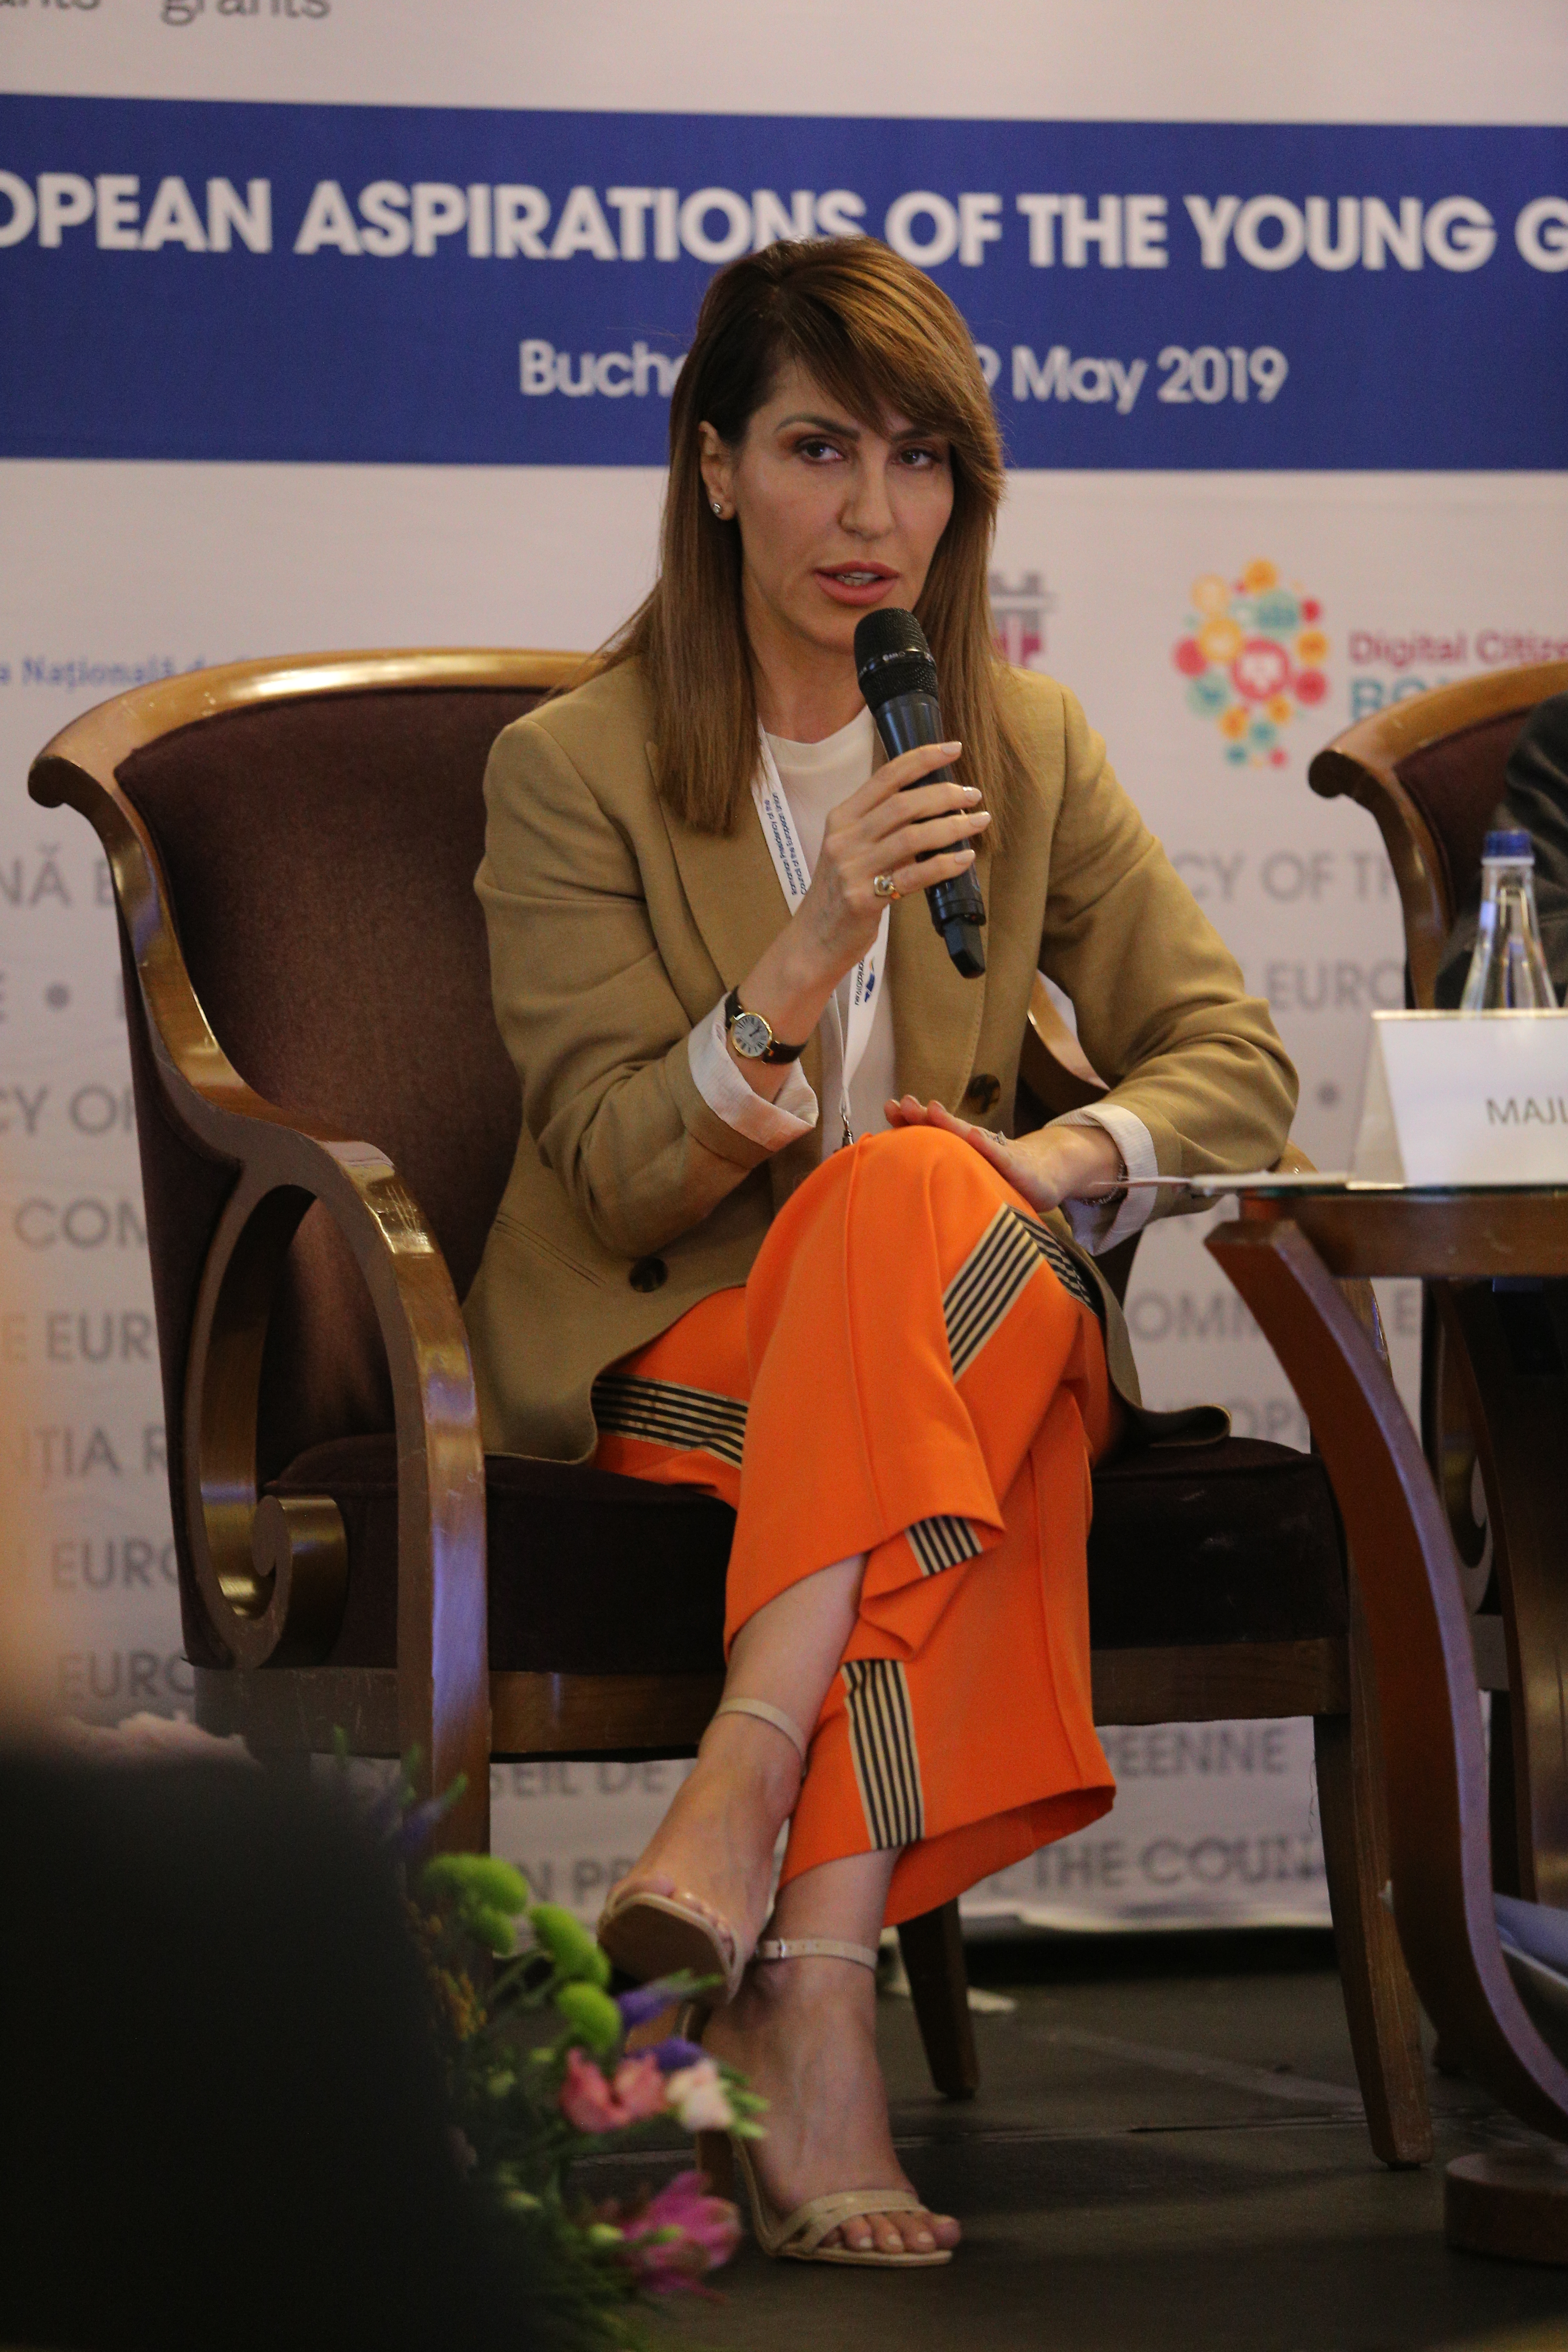 Secretary General of the Regional Cooperation Council Majlinda Bregu at the opening of the Conference ‘How to better respond to European aspirations of the young generation in the Western Balkans?’ organised by the Romanian Presidency of the EU Council in partnership with the RCC, in Bucharest on 28 May 2019 (Photo: RCC/Stefan Banu)